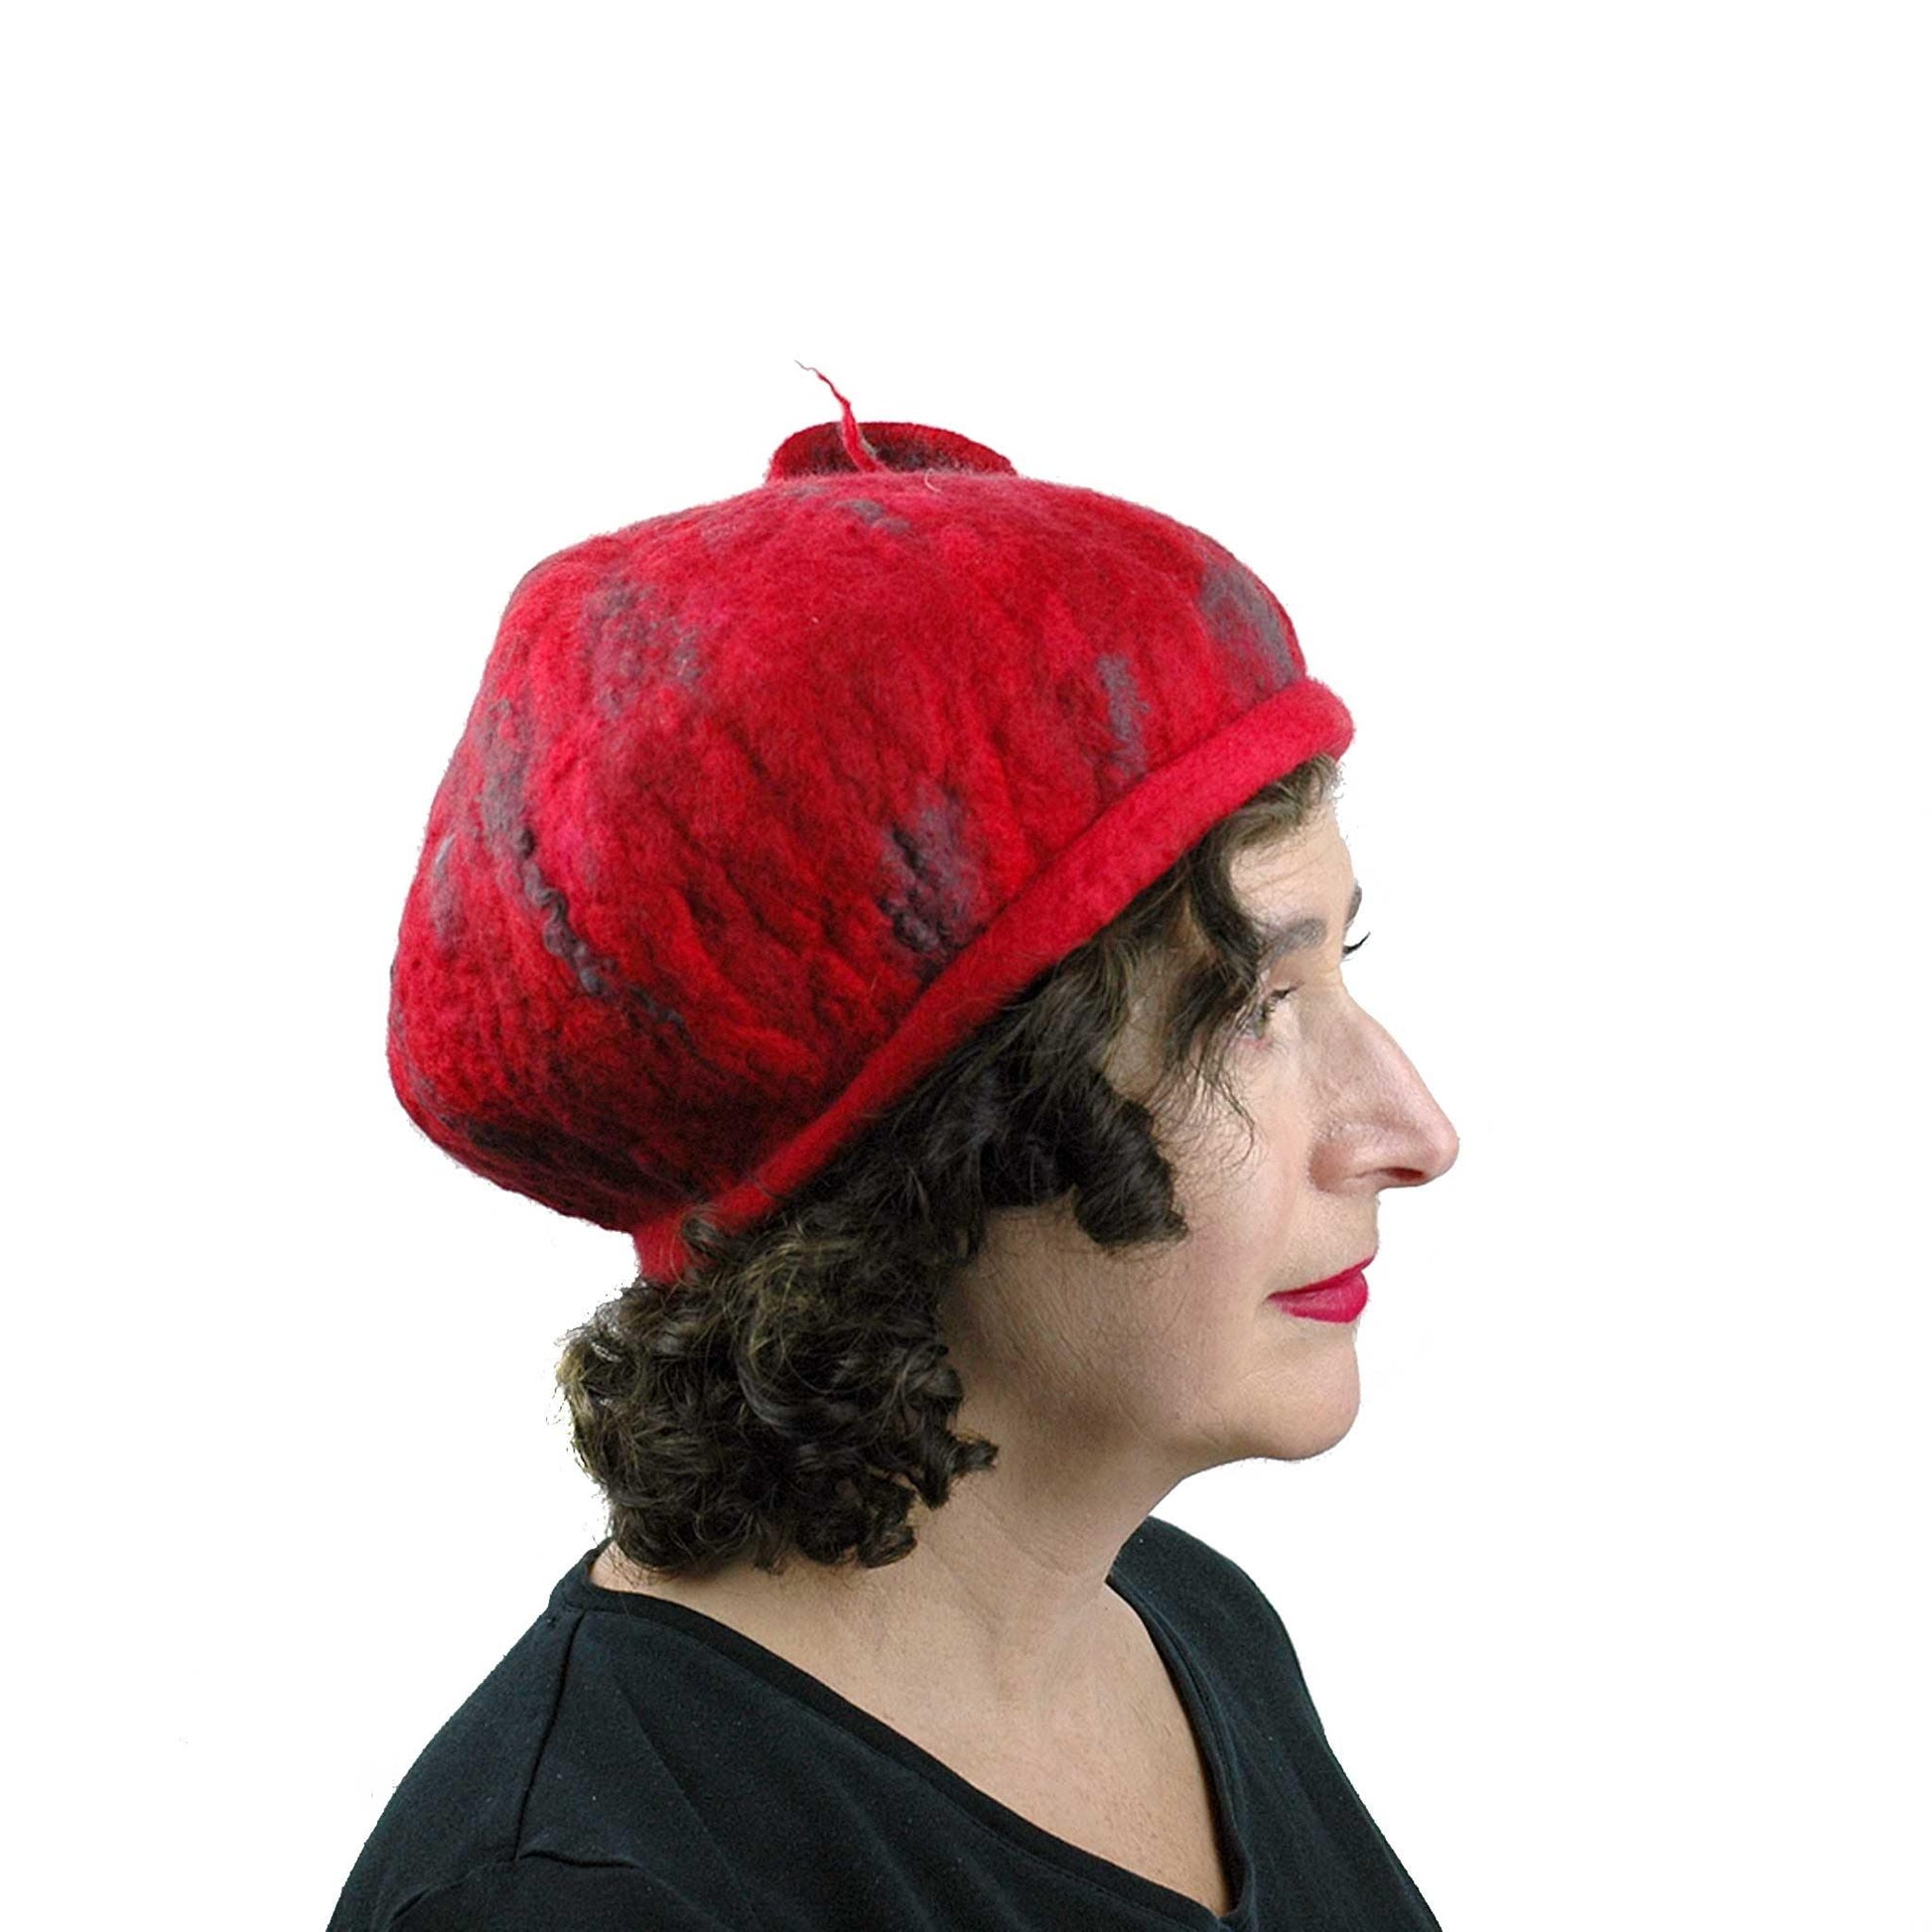 Fishtail Hat in Red with Gray Stripes - side view